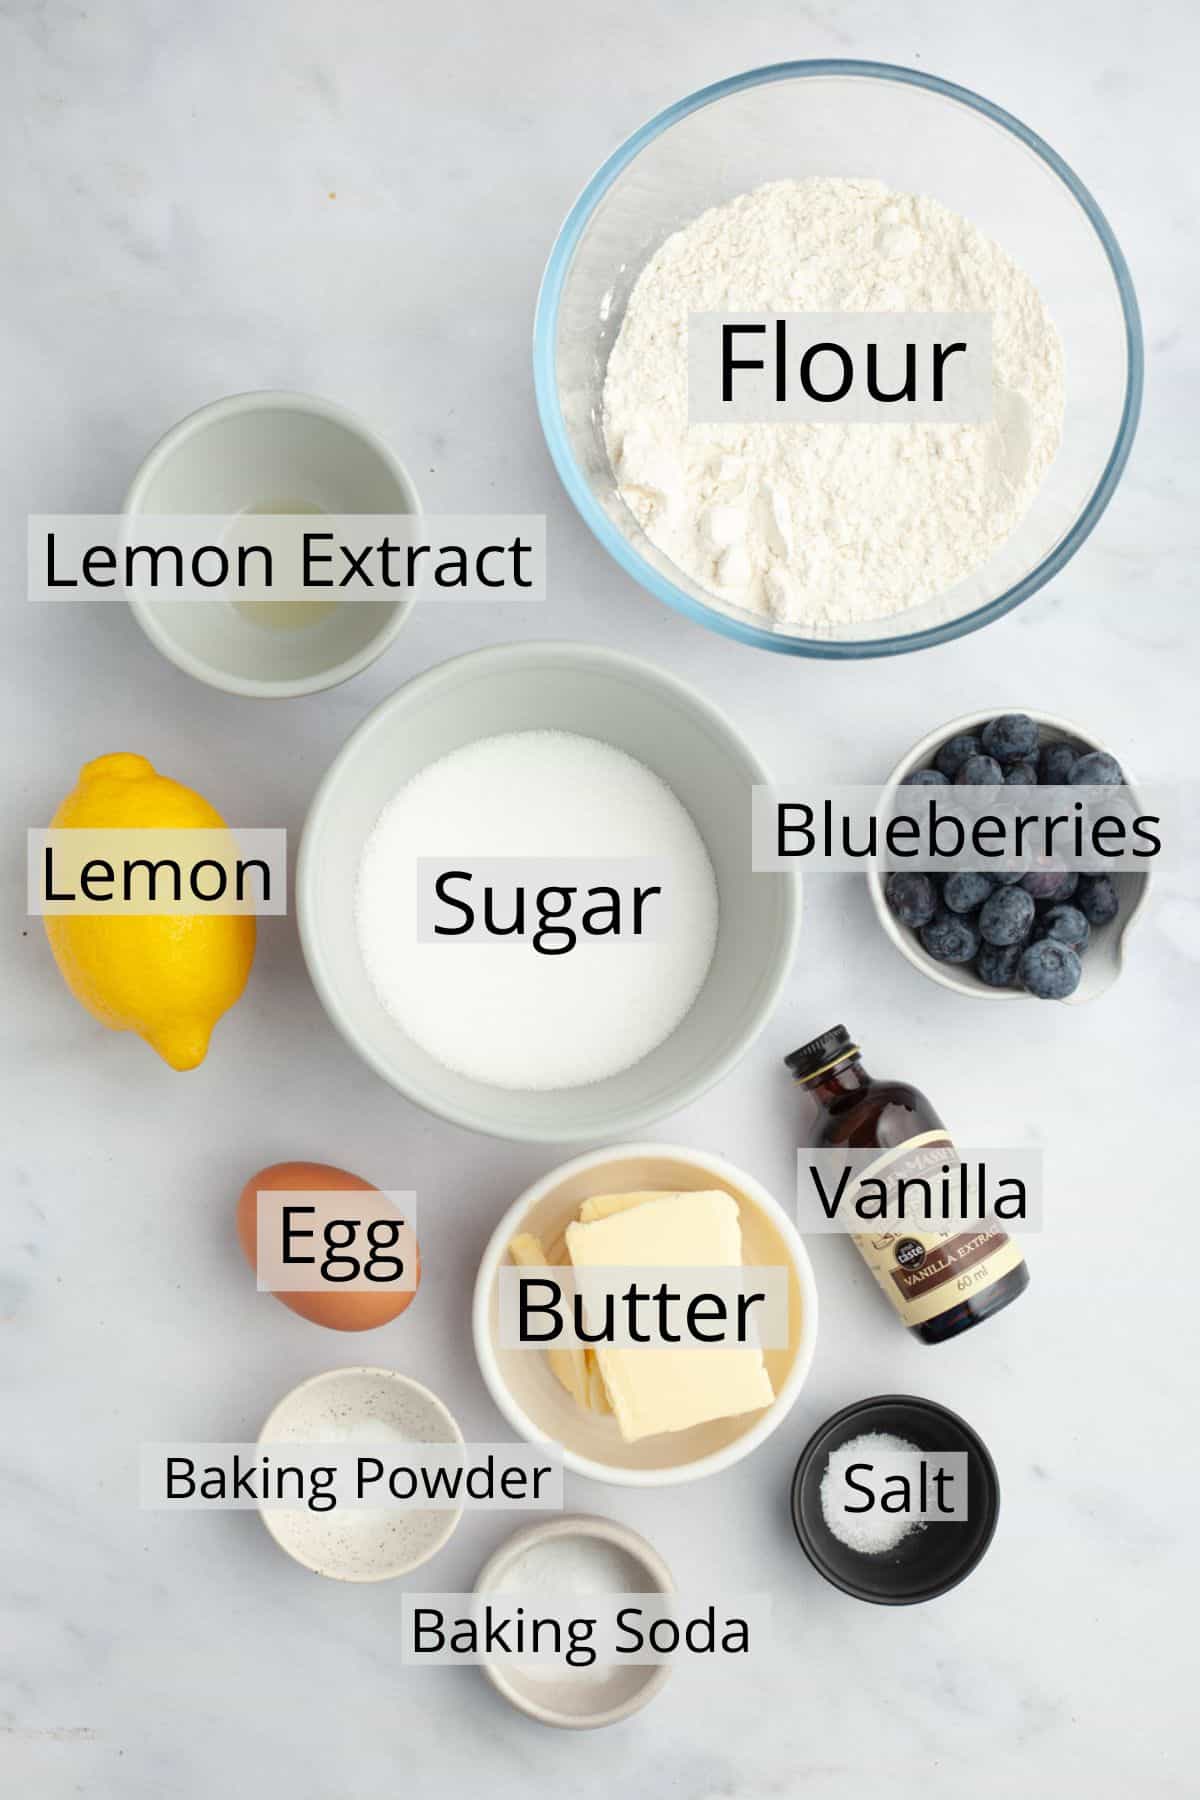 All the ingredients needed to make lemon blueberry cookies weighed out into small bowls.